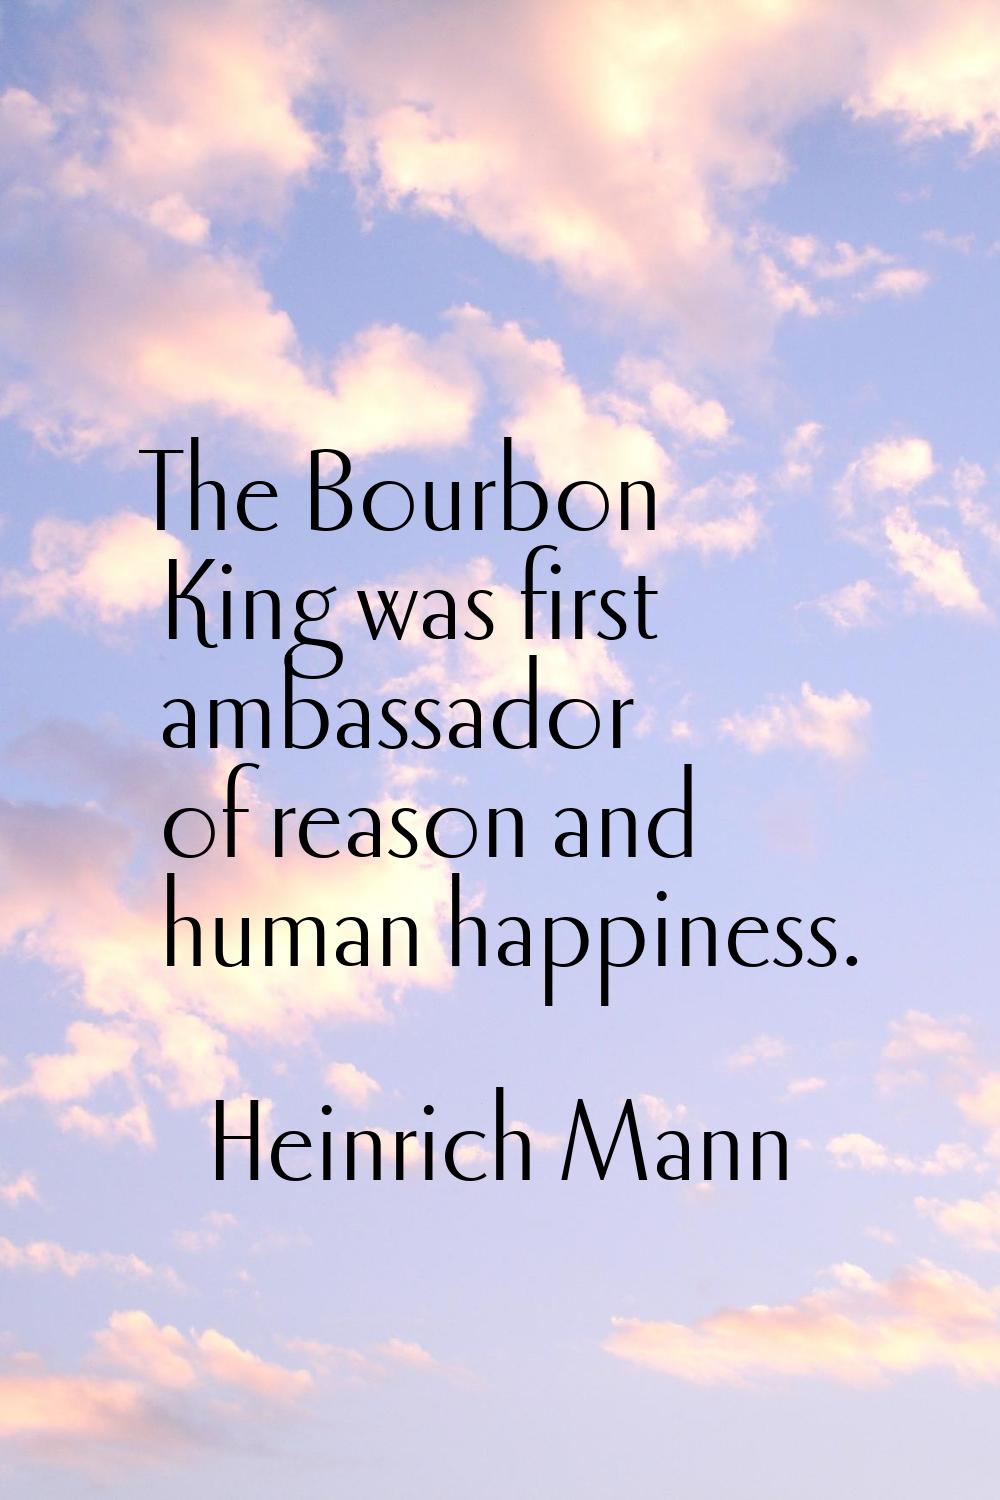 The Bourbon King was first ambassador of reason and human happiness.